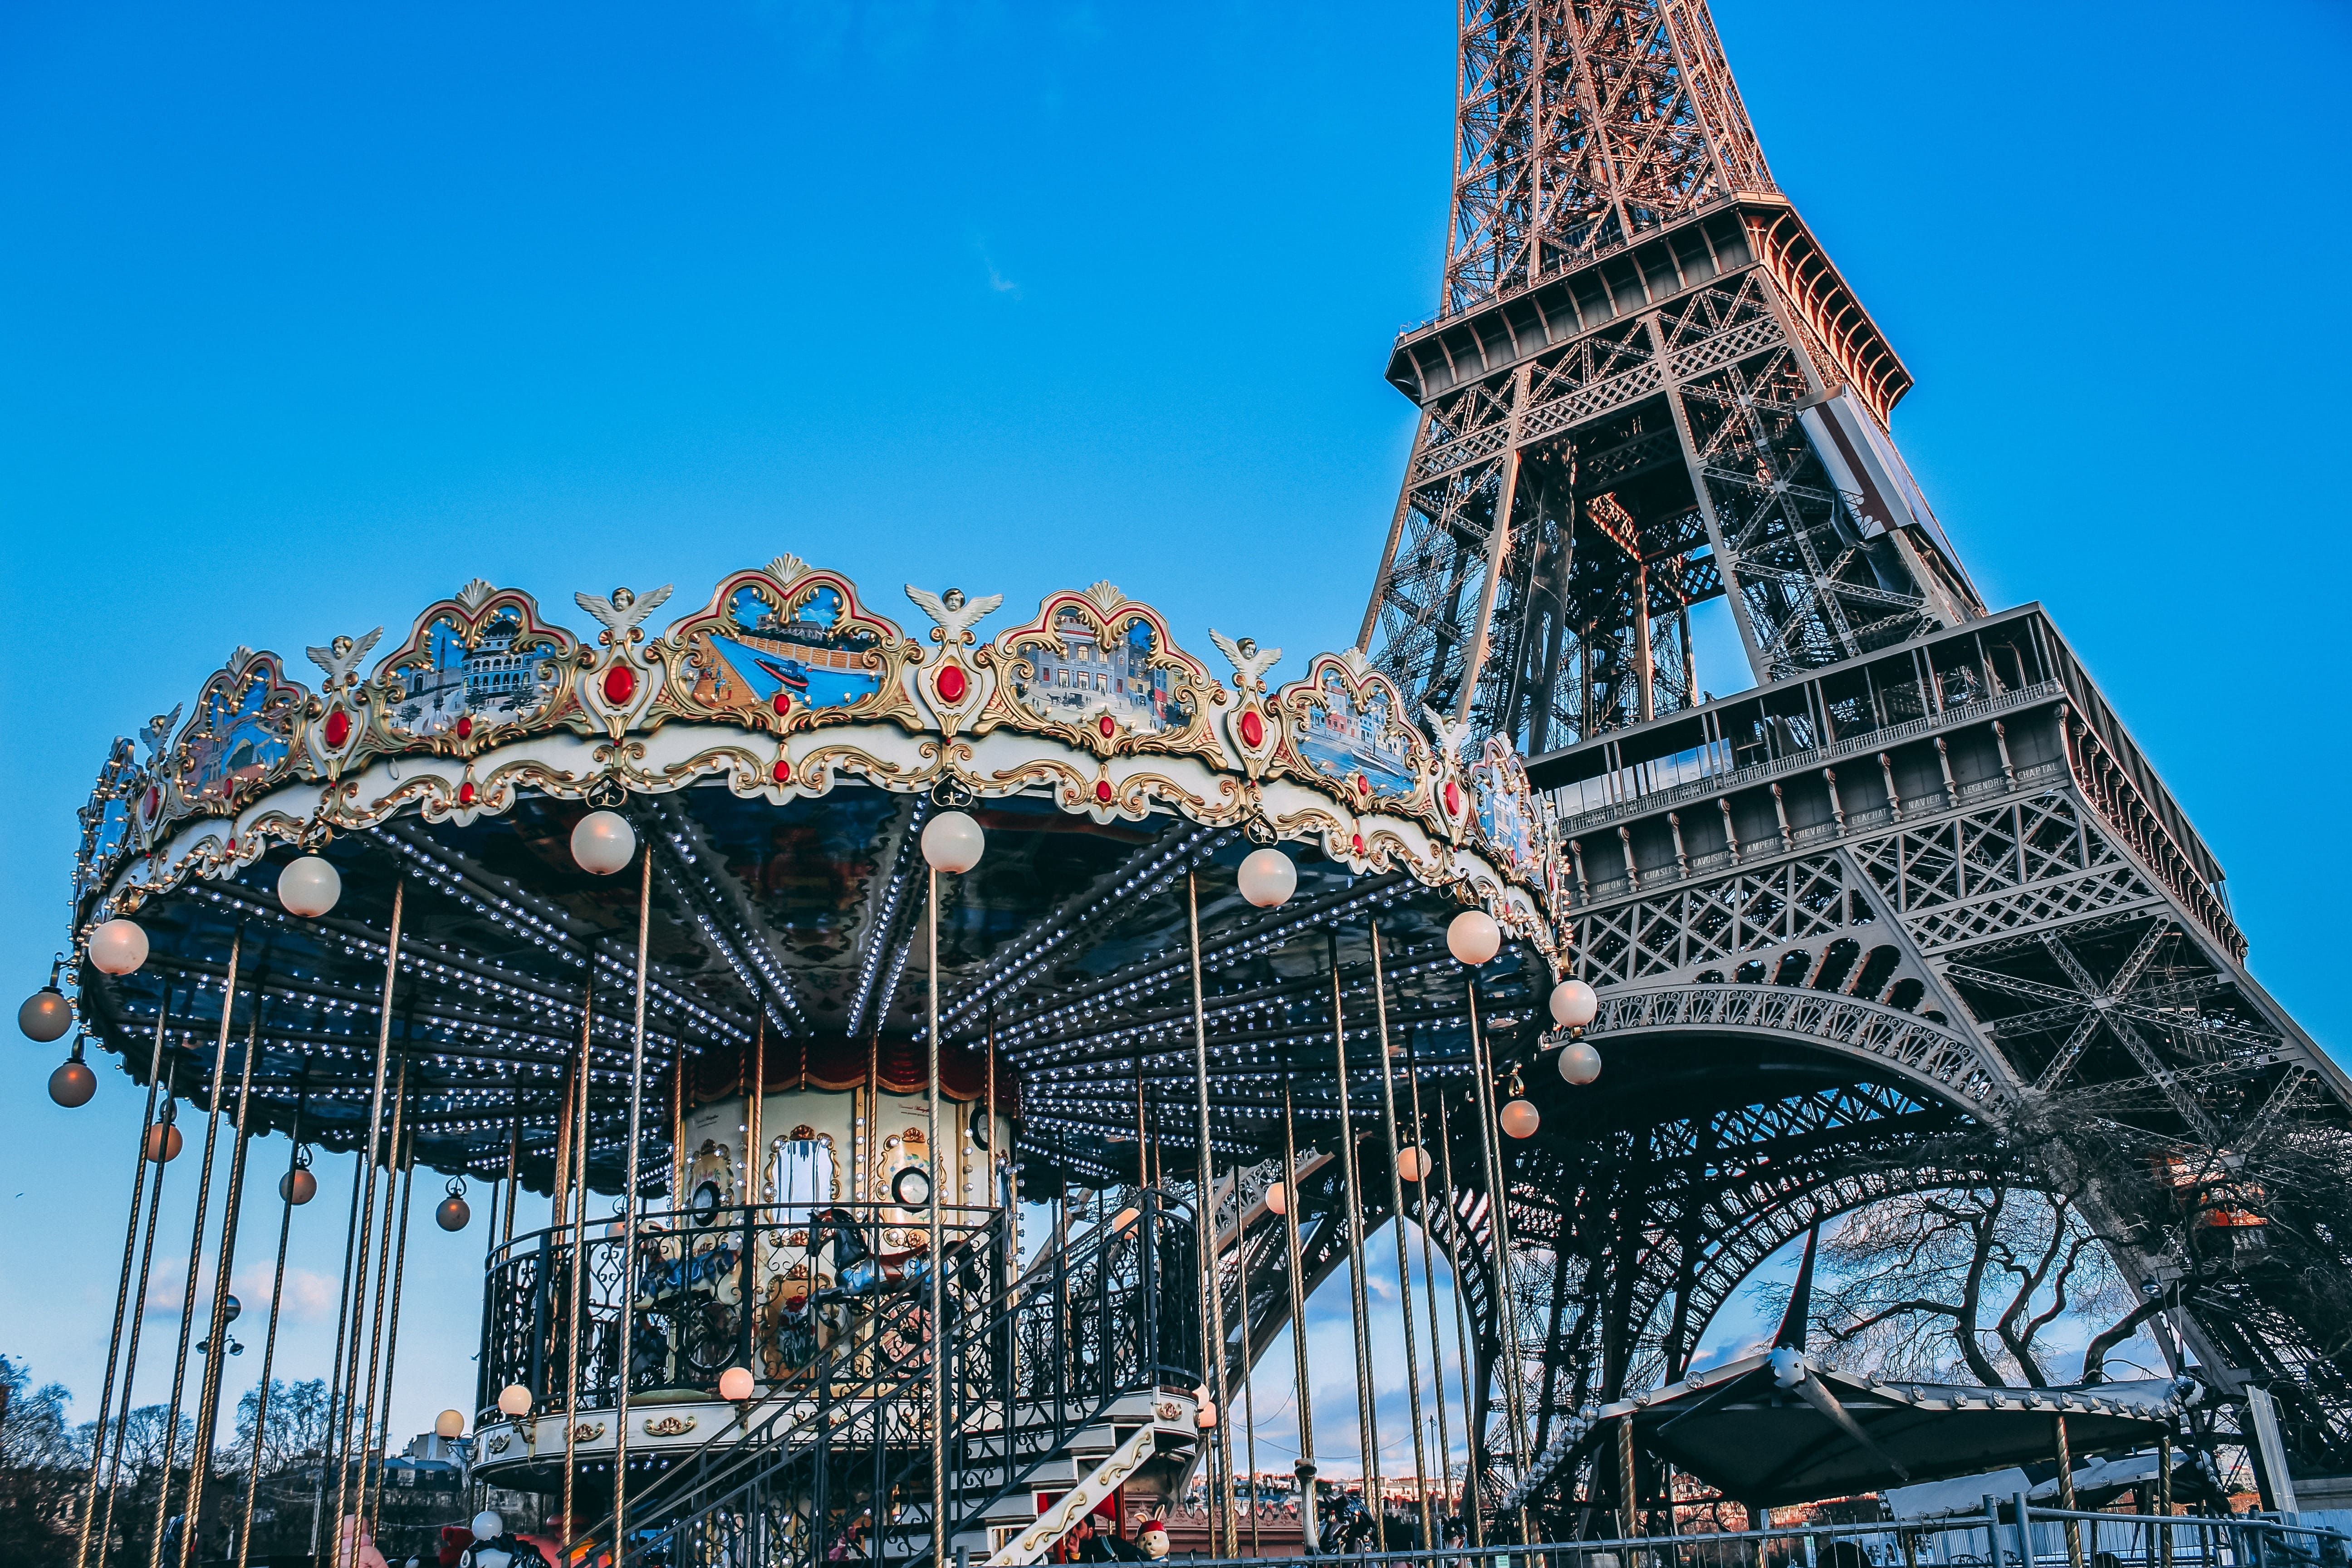 Eiffel Tower Carousel in Paris, adds charm to the EOR France experience